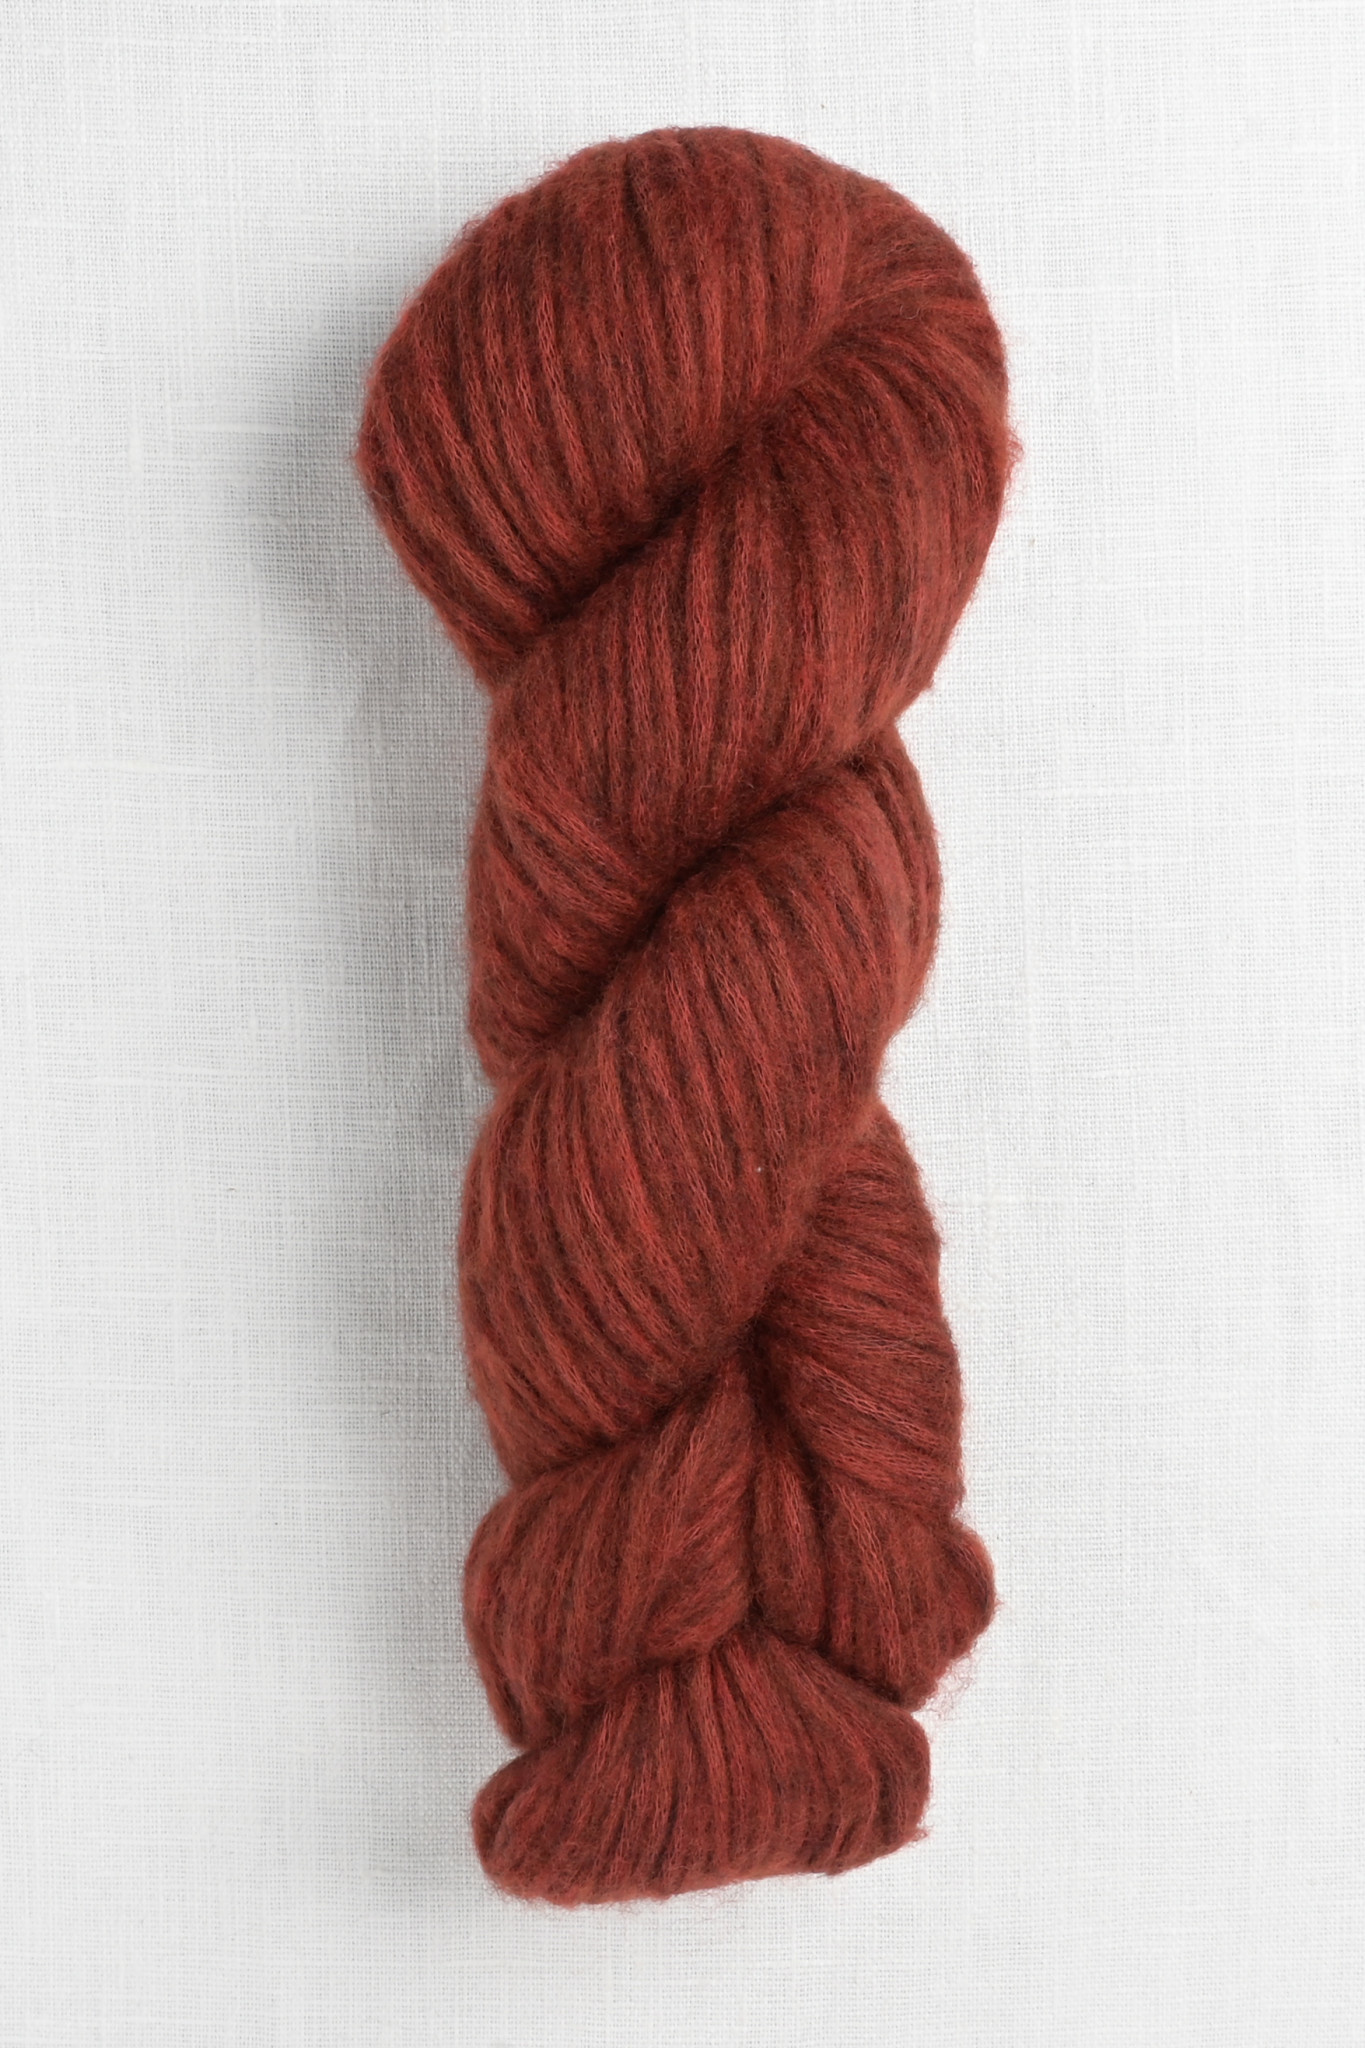 Tag et bad dateret knude Woolfolk Luft L22 - Wool and Company Fine Yarn